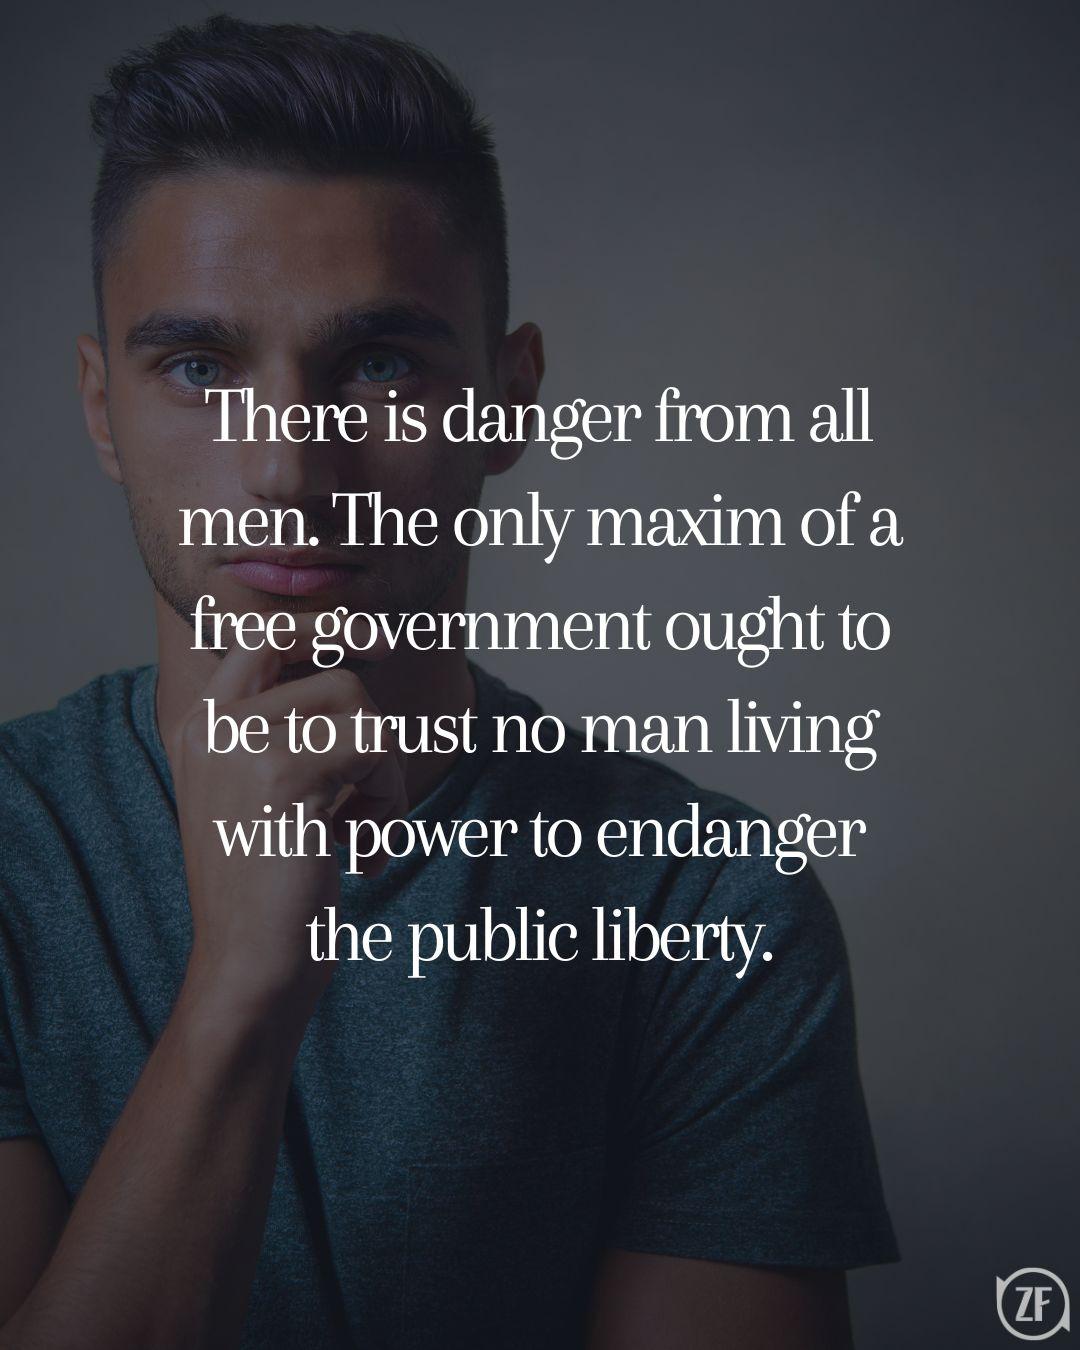 There is danger from all men. The only maxim of a free government ought to be to trust no man living with power to endanger the public liberty.